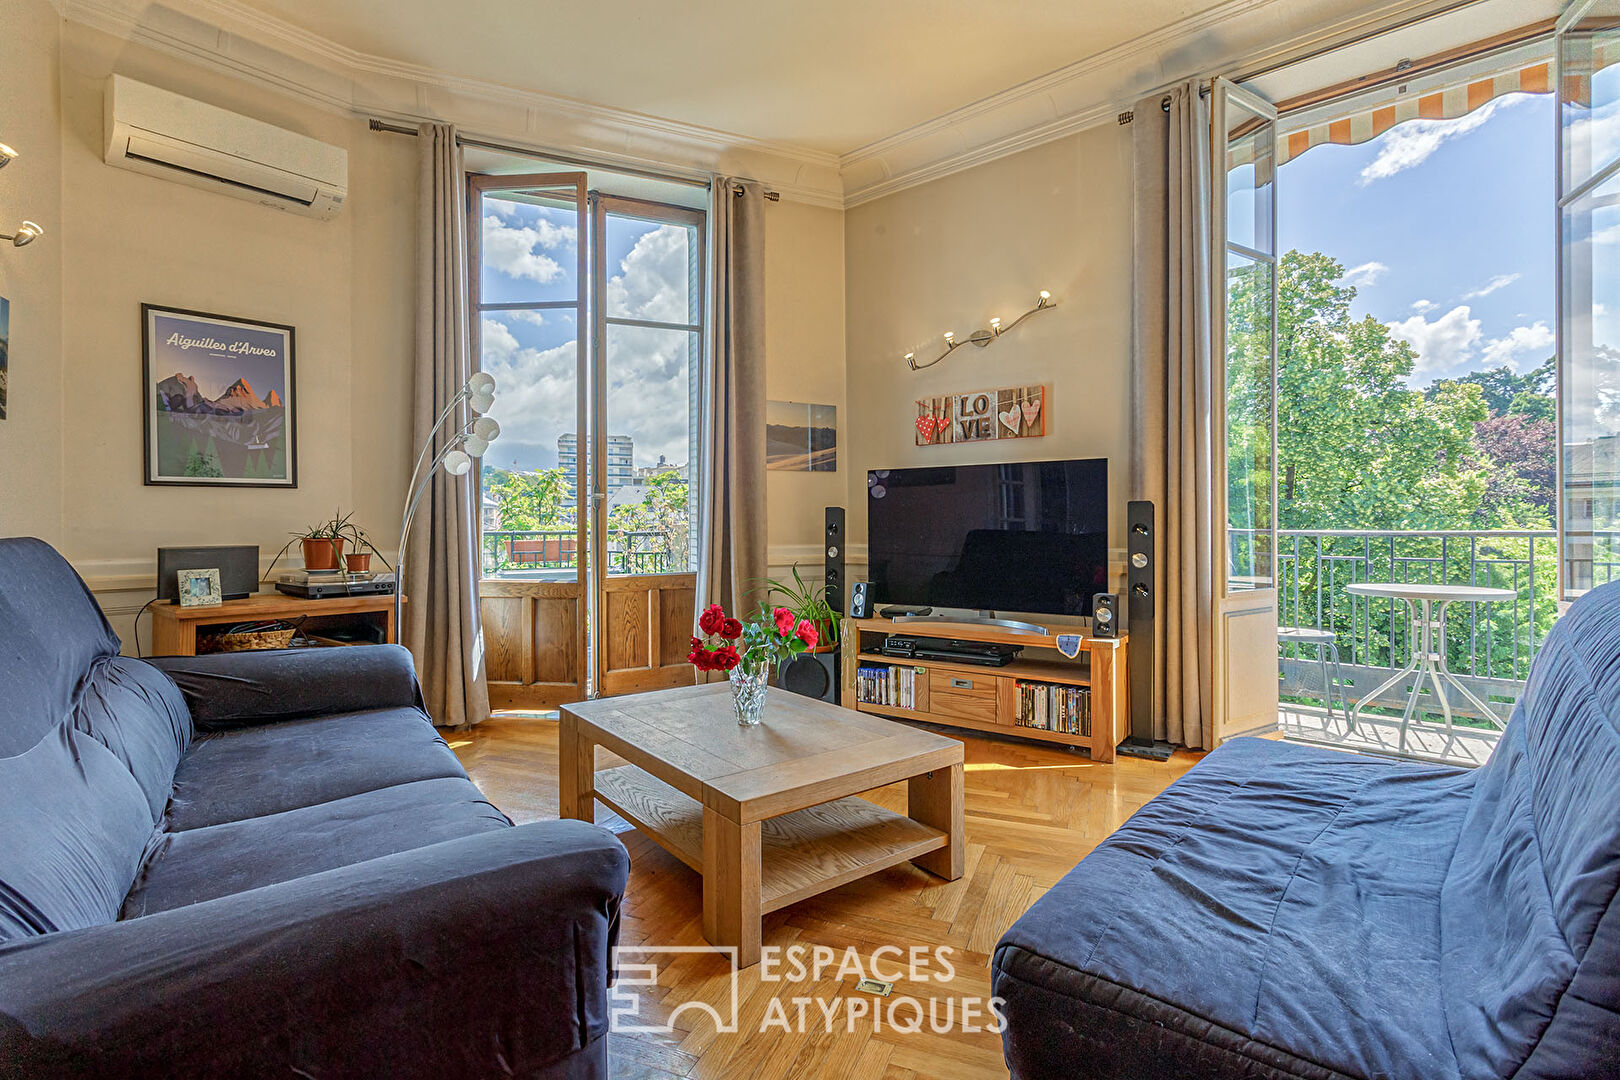 A gem of an apartment of 178 sqm in the heart of the city